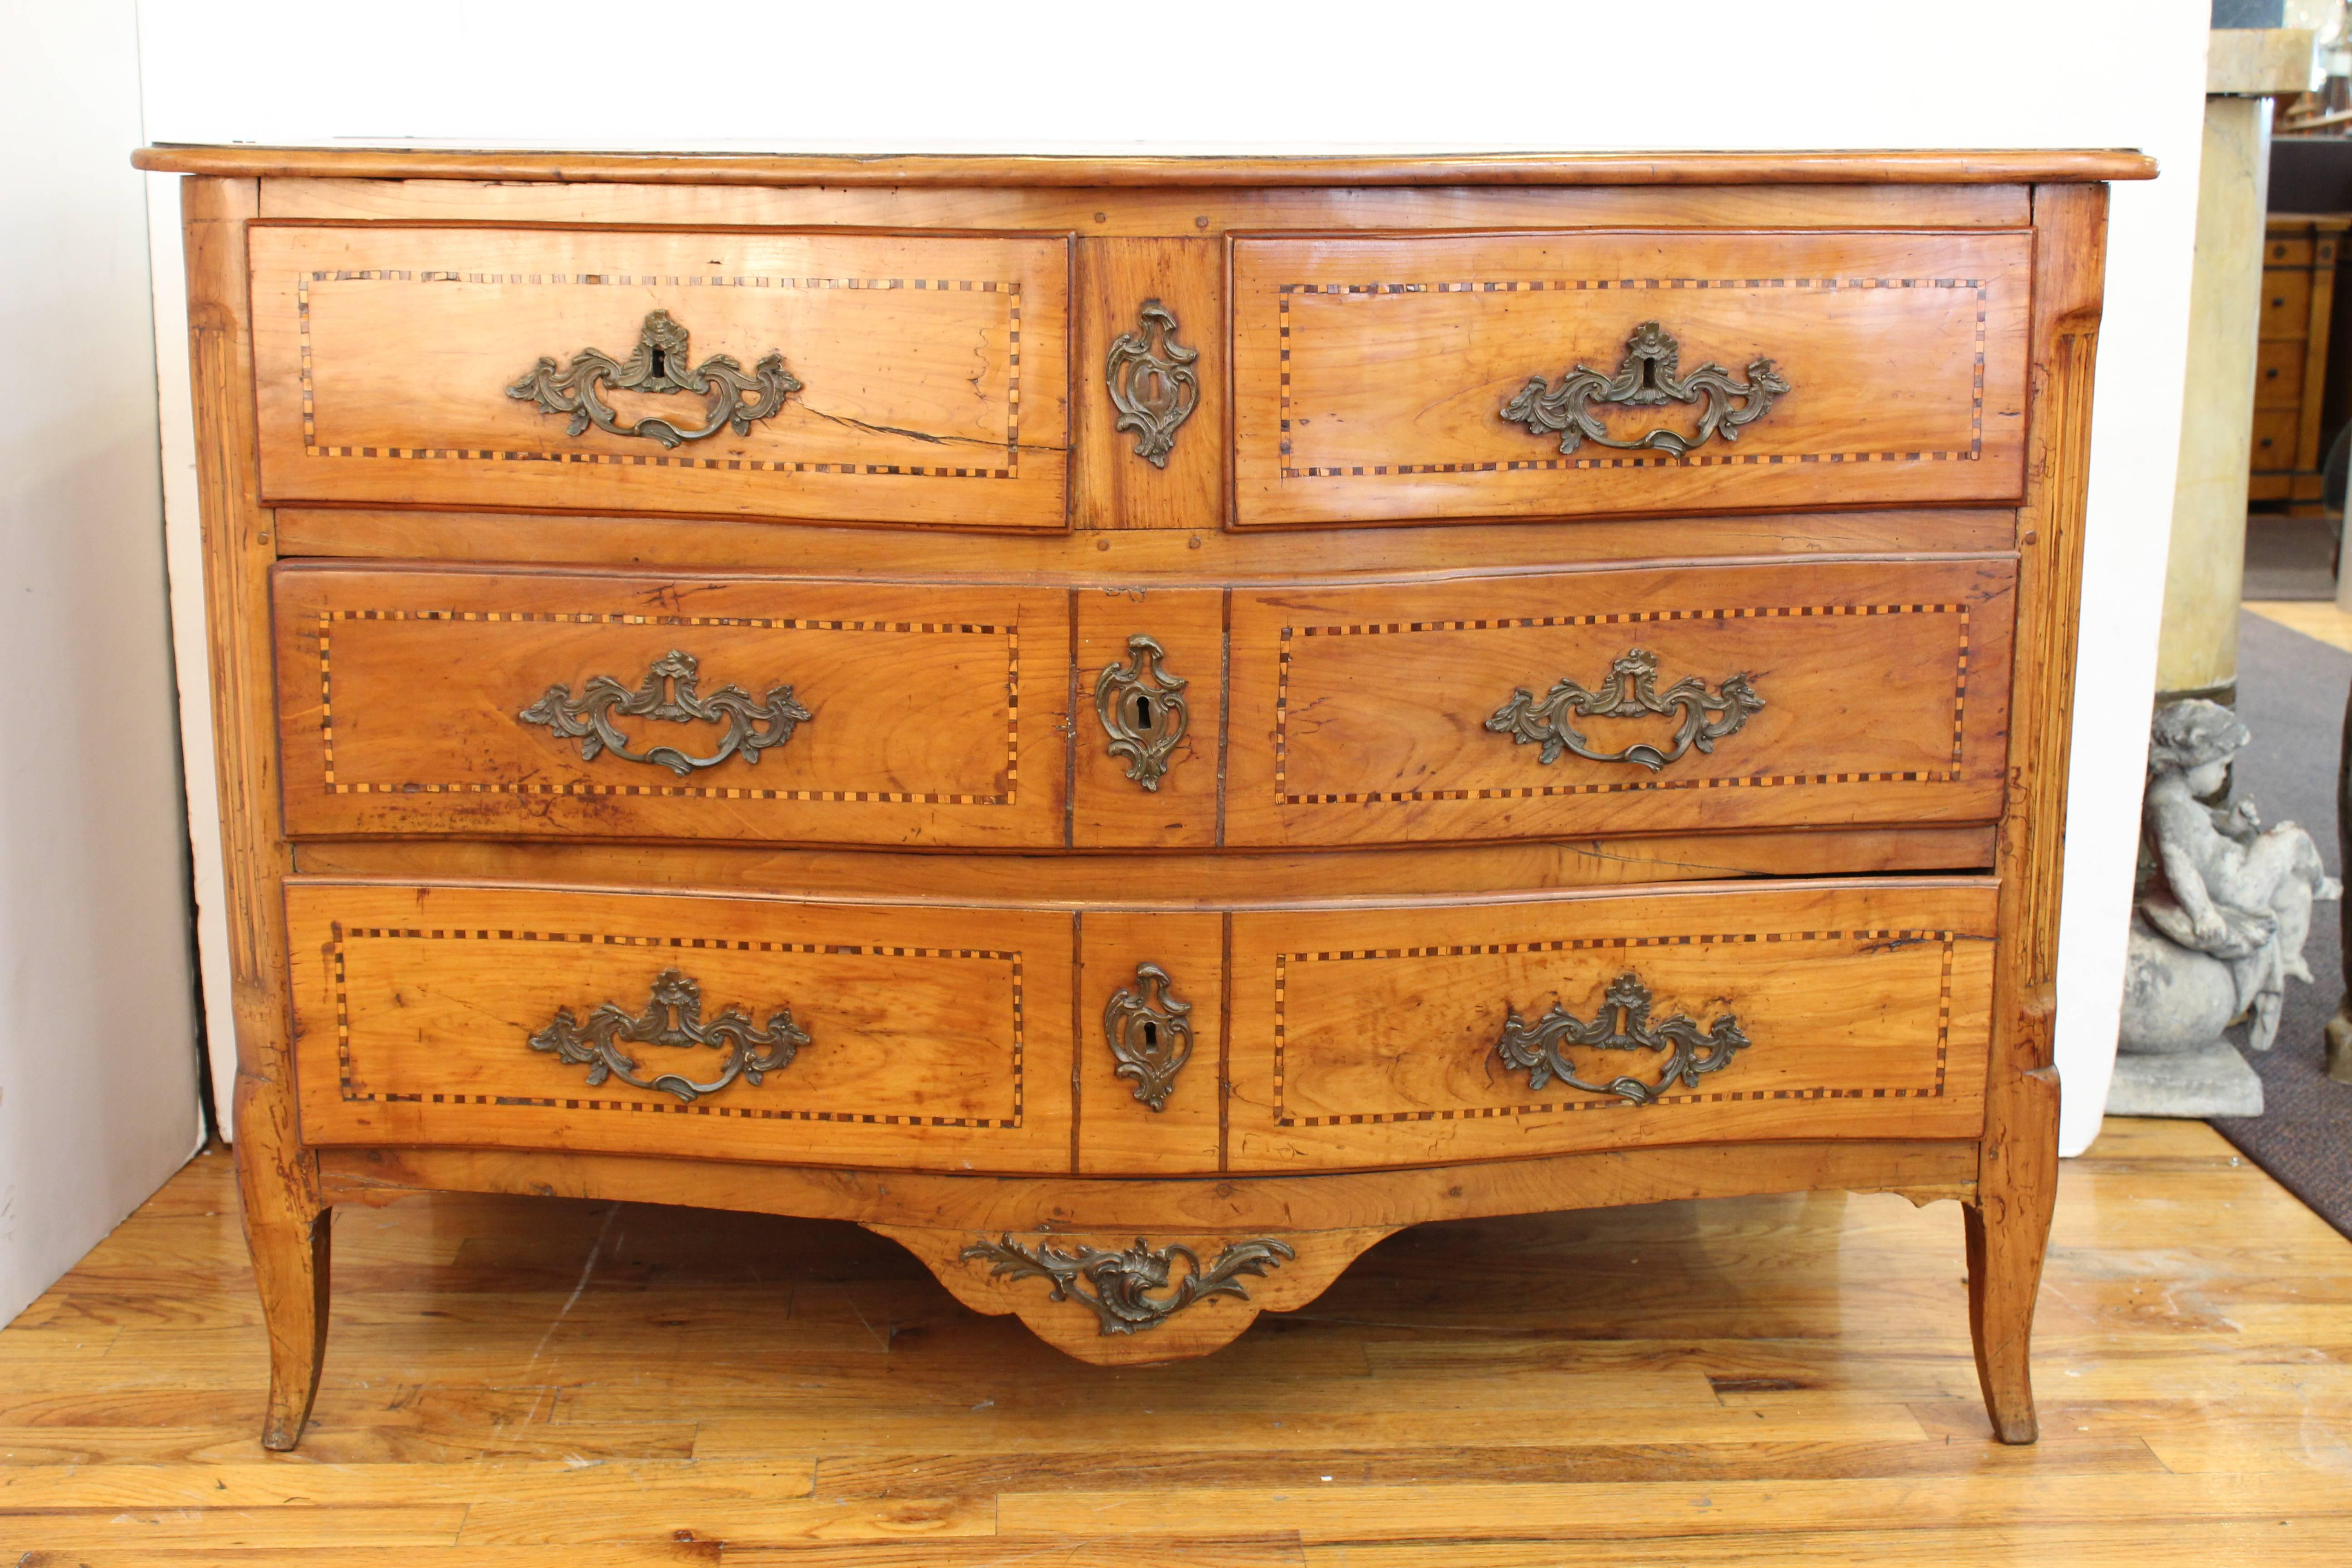 A late 18th century German commode in a Baroque Revival style, in walnut wood with delicate marquetry designs. Two short drawers above two long drawers, raised on swung legs and with Baroque style hardware. Wear appropriate to age and use, in good